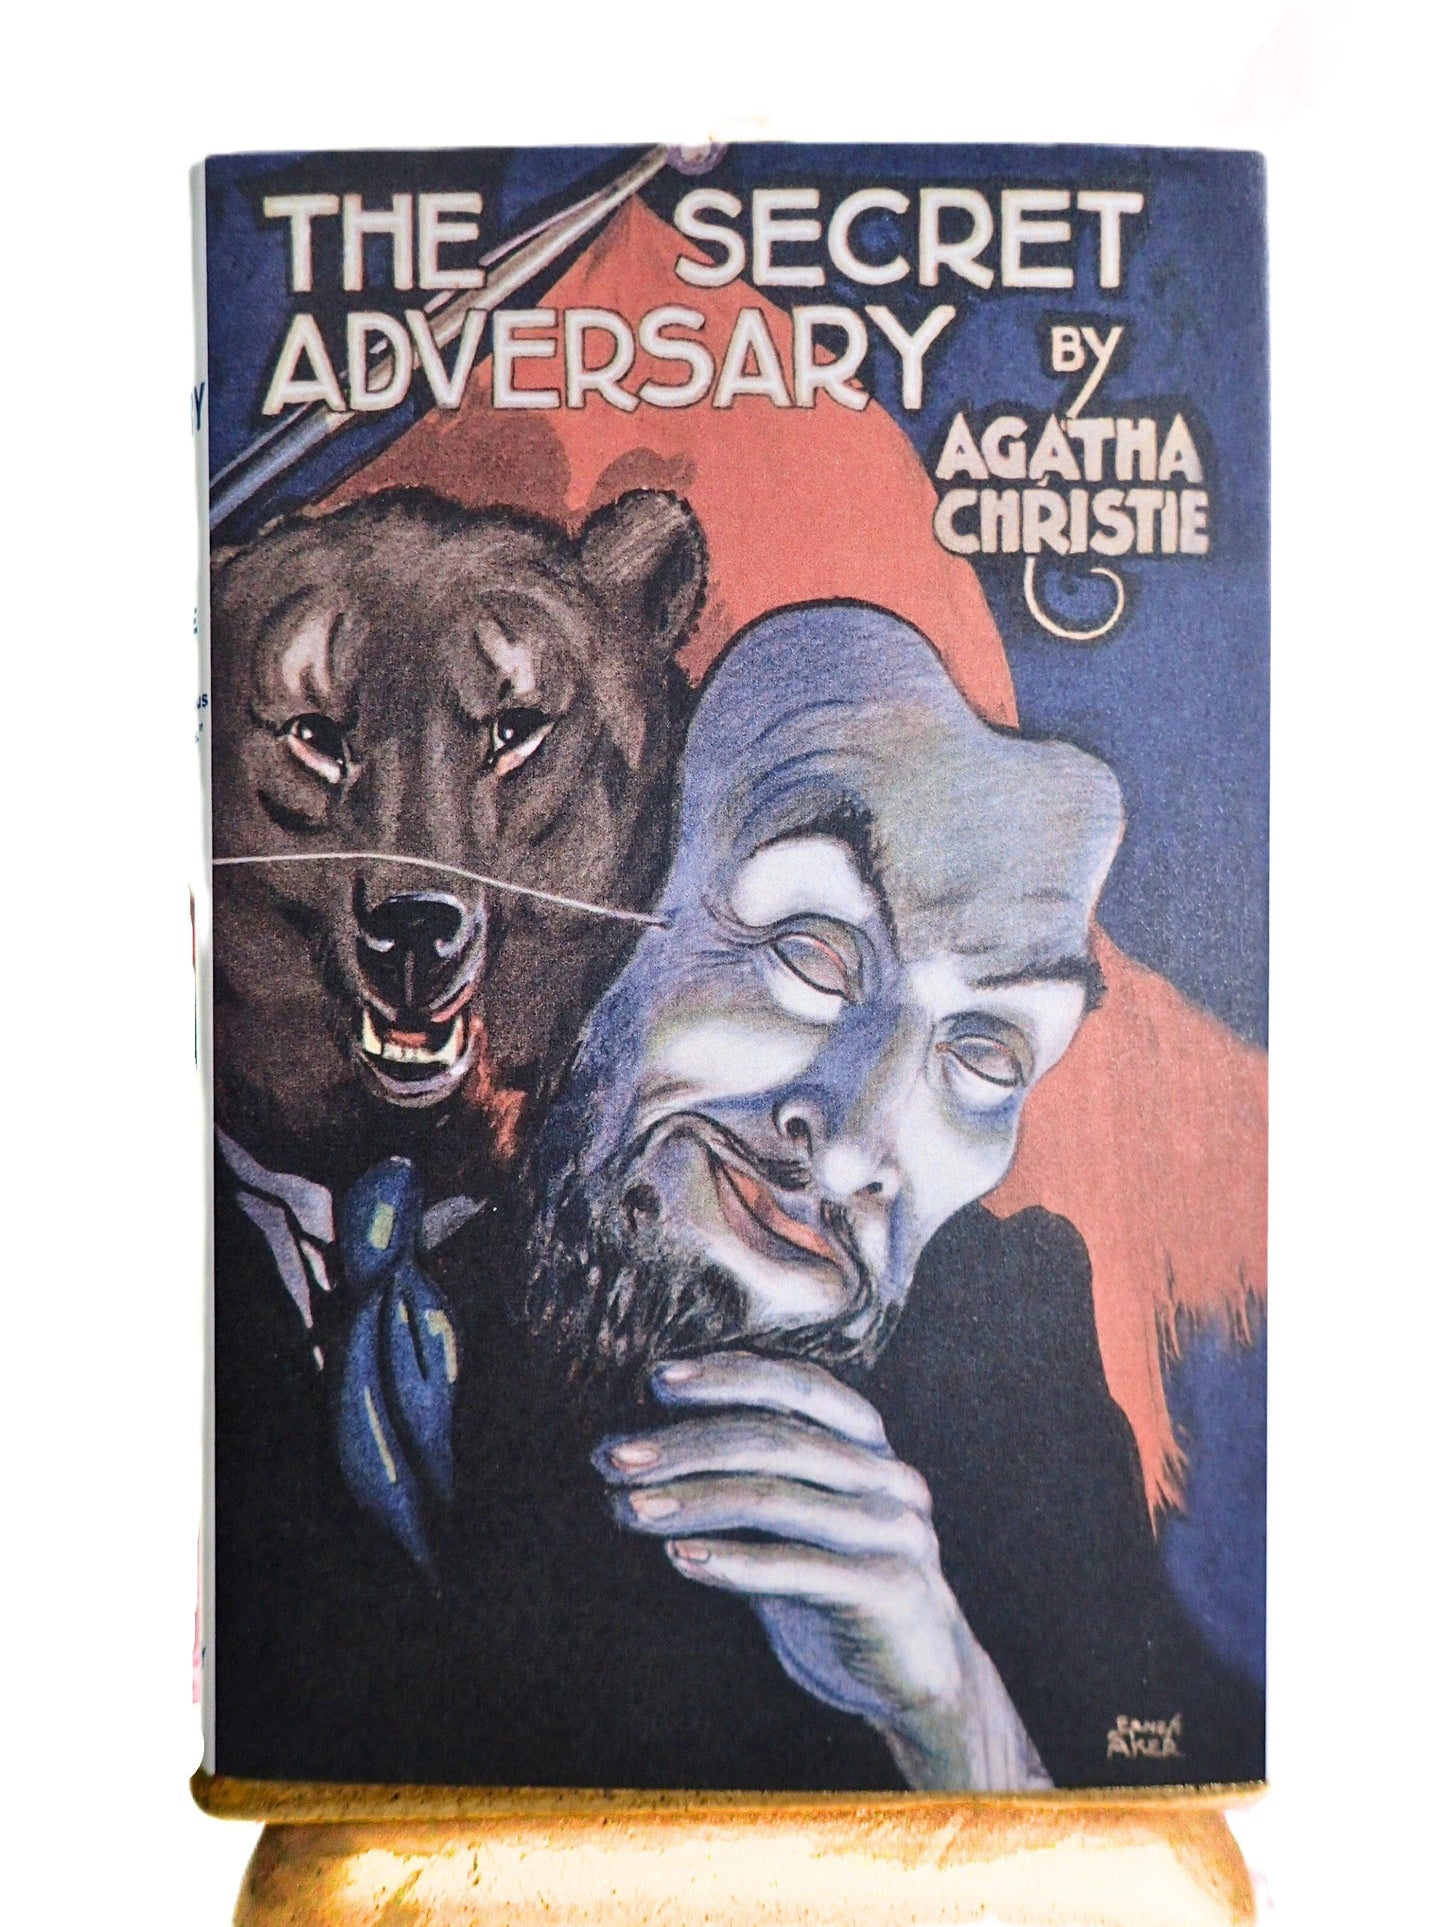 The Secret Adversary Front cover of Agatha Christie vintage book .